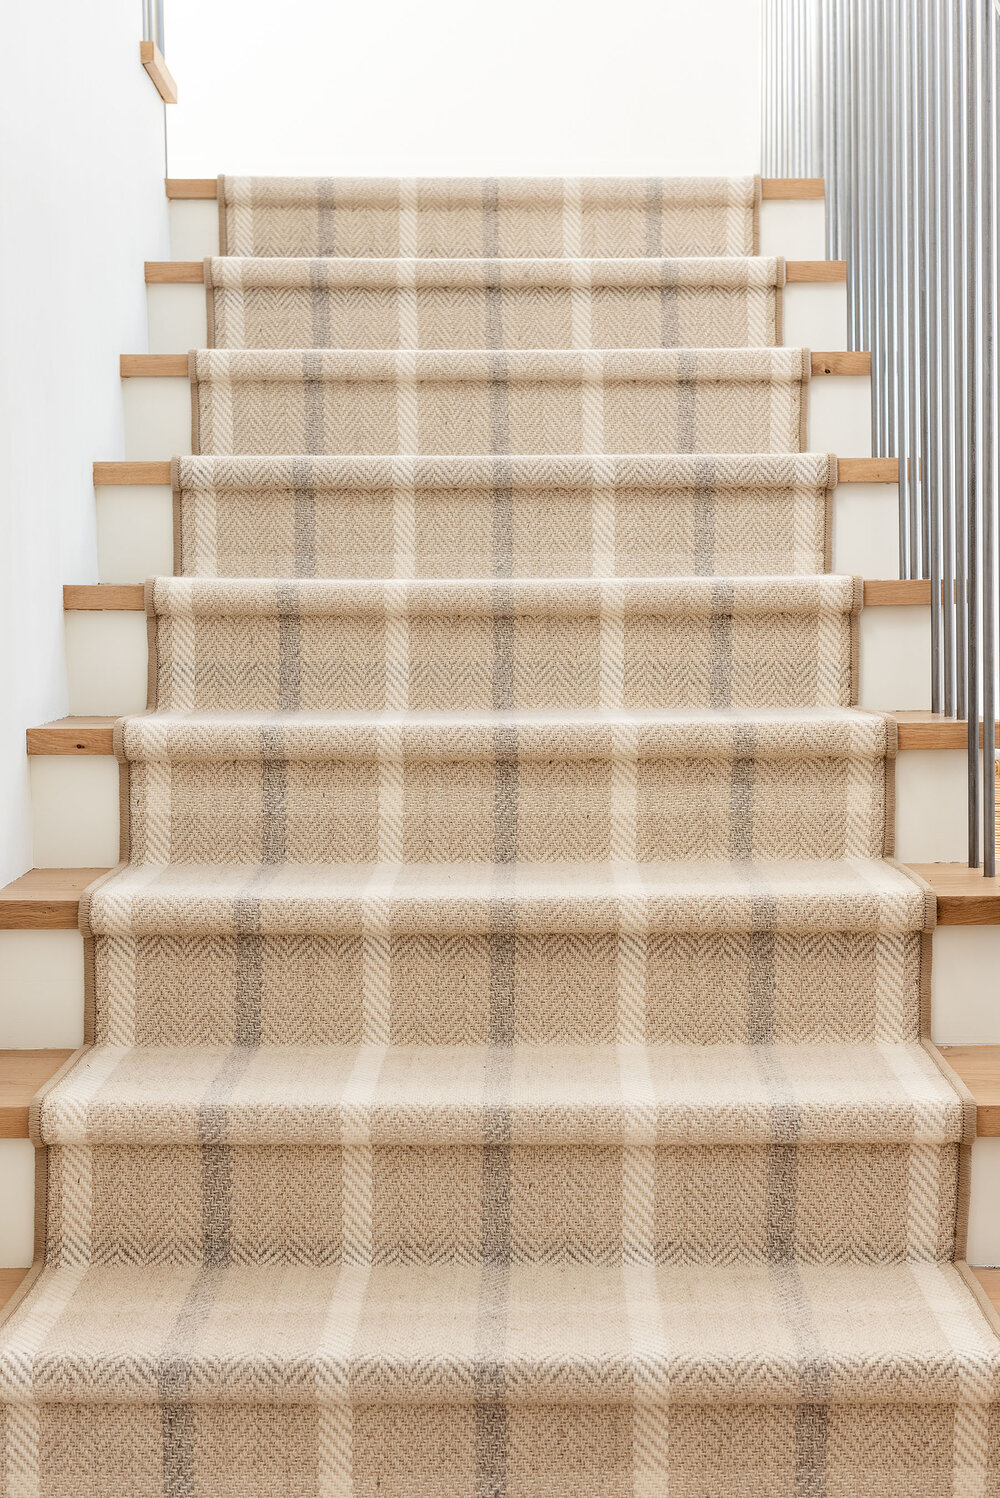 How to improve on your stair carpet